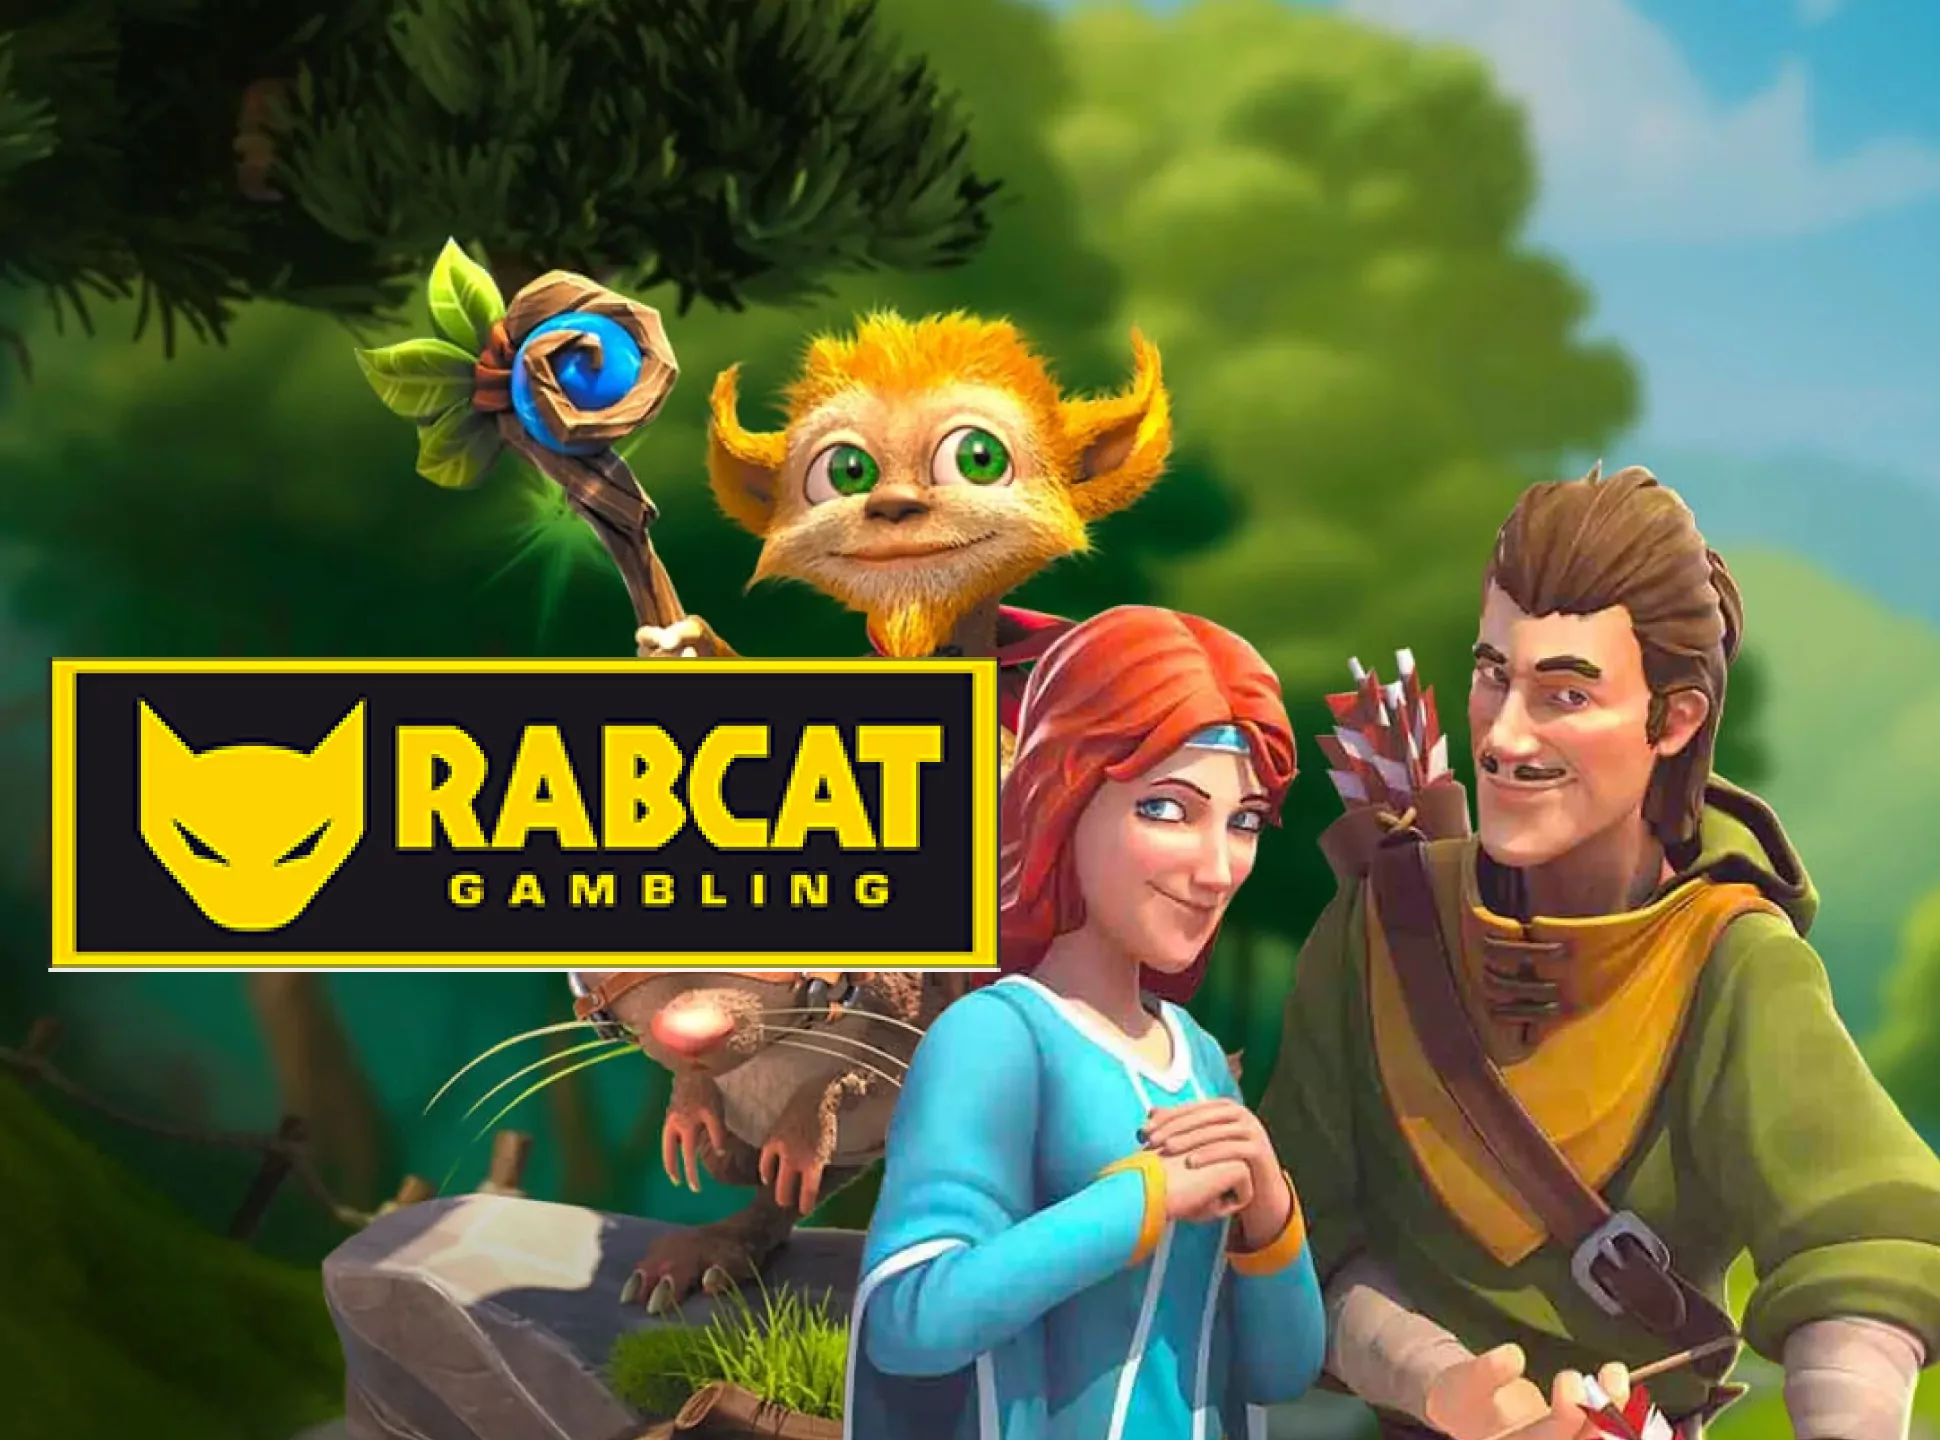 Try yje great 3D games form the Rabcat.